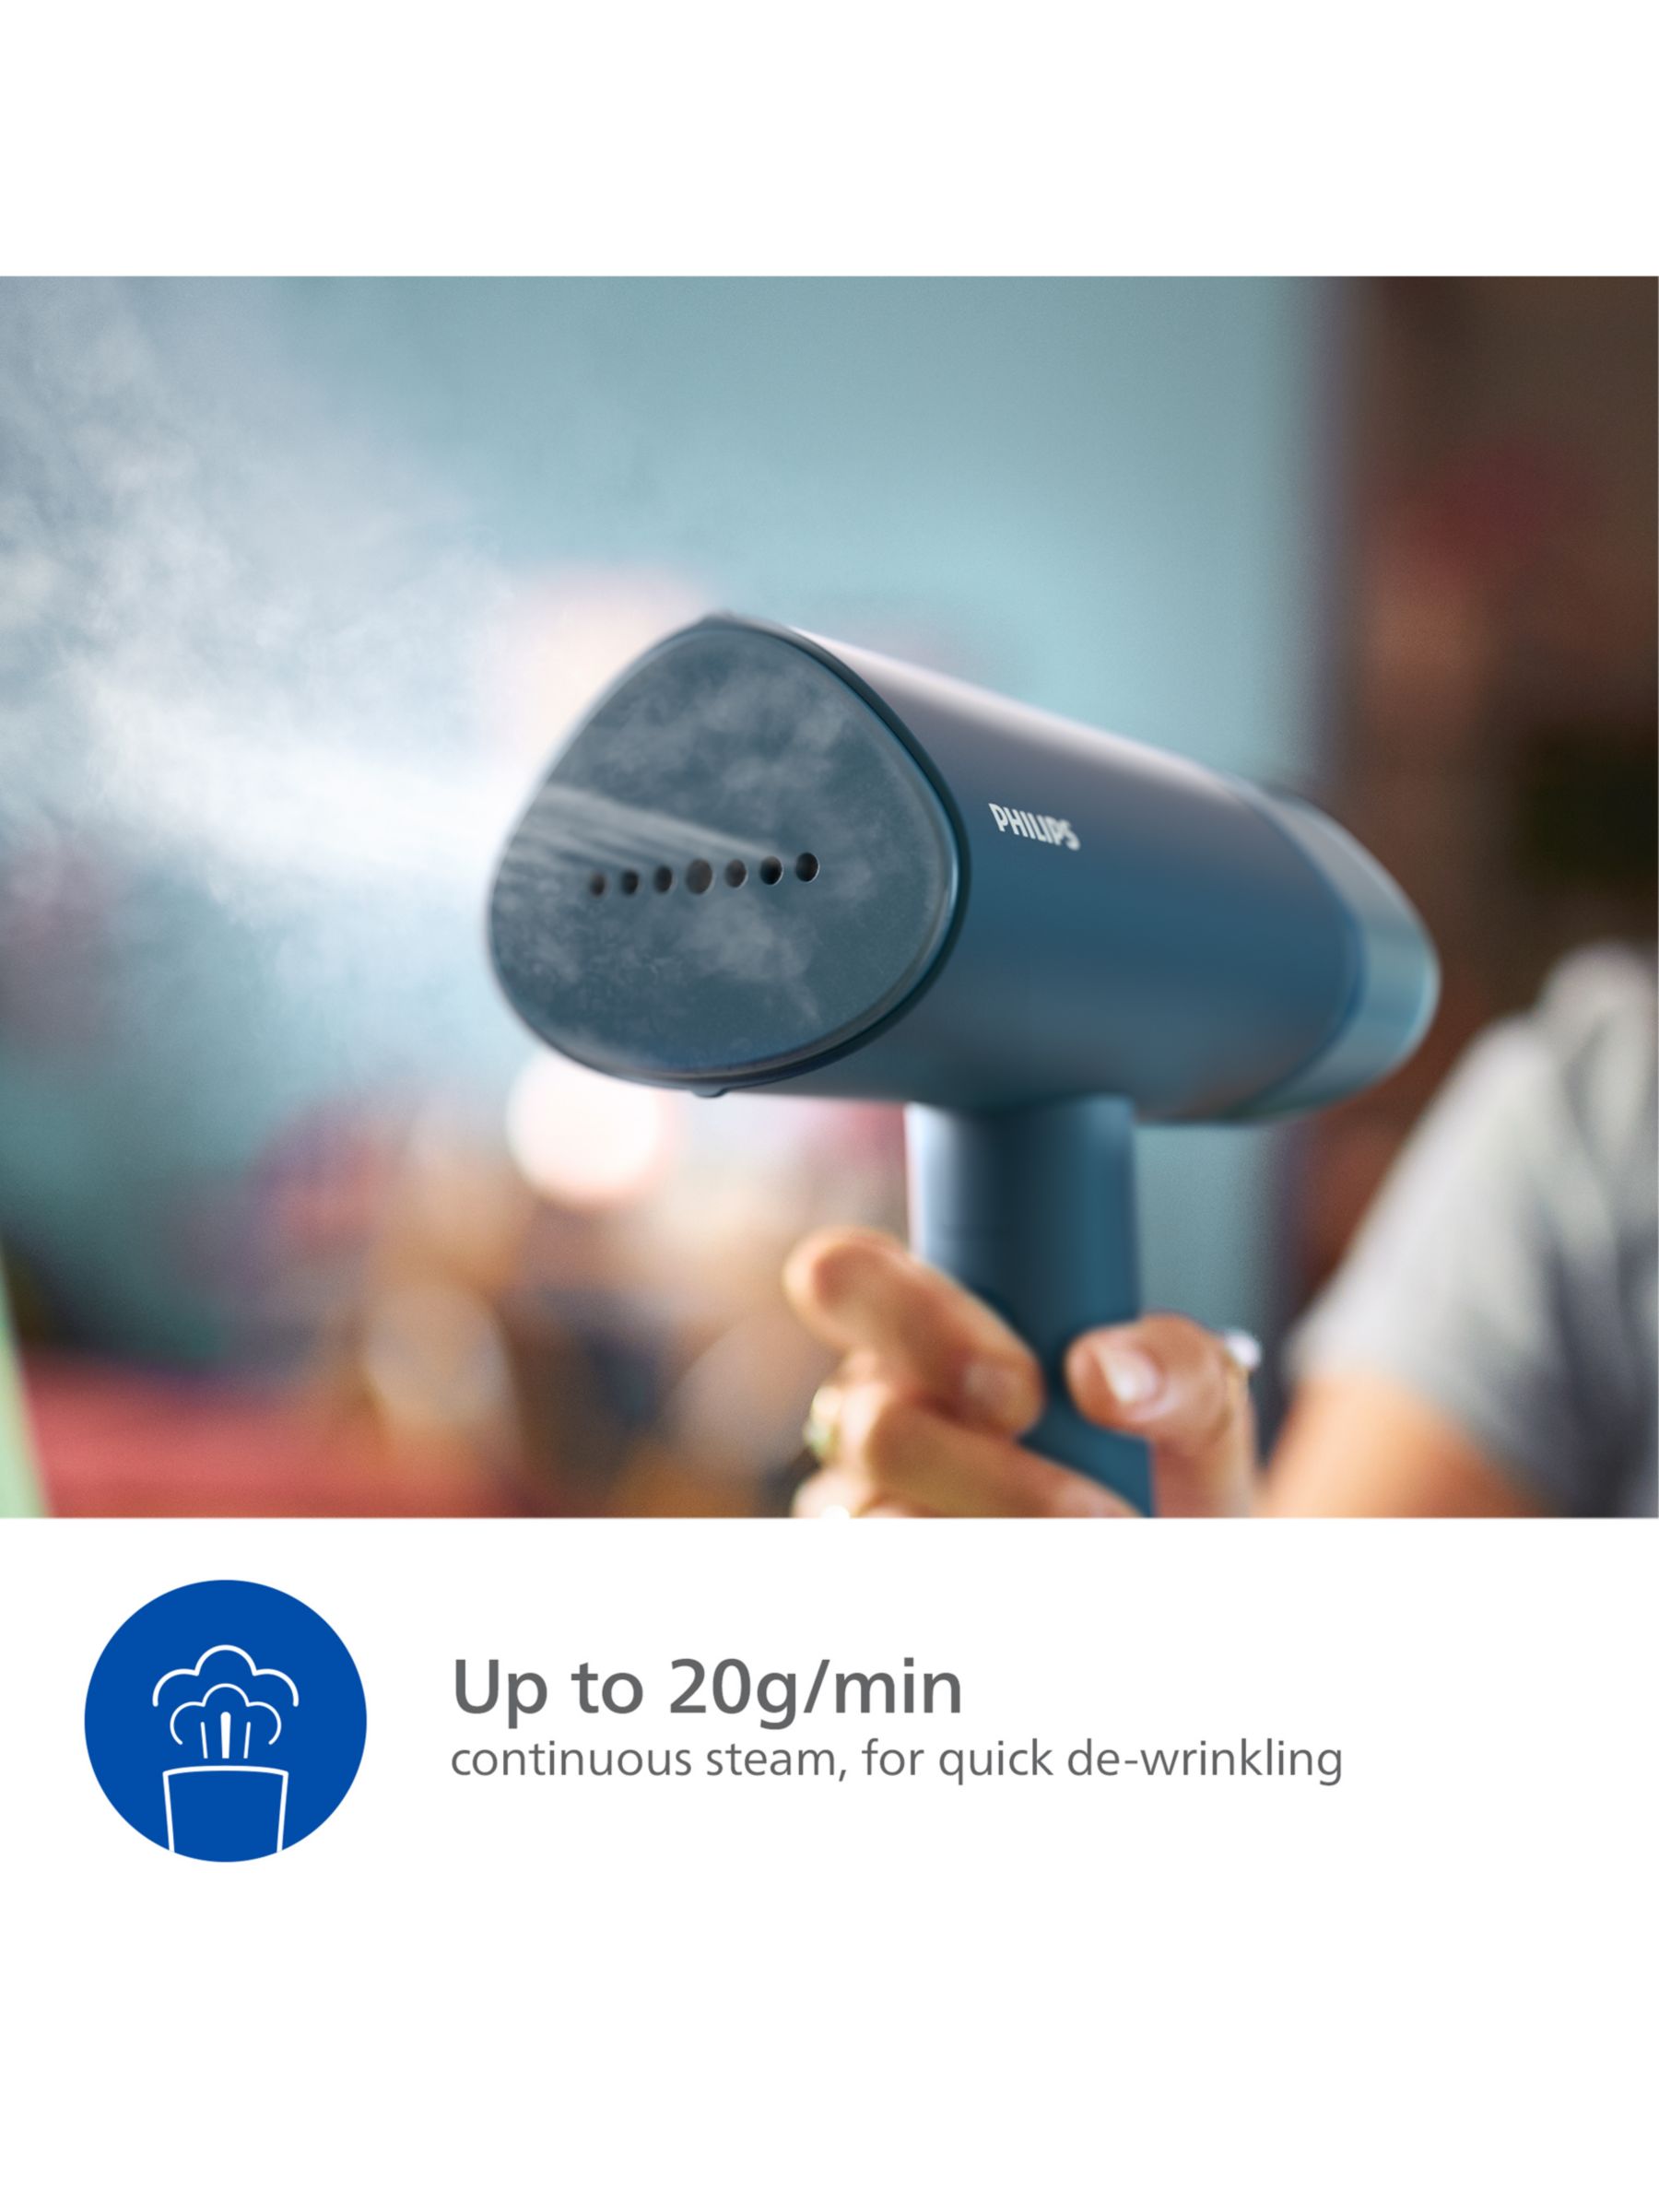  PHILIPS 3000 Series Handheld Steamer, Compact & Foldable, Ready  to Use in ˜30 Seconds, 1000W, up to 20g/min, No Ironing Board Needed, Blue  (STH3000/20) : Home & Kitchen